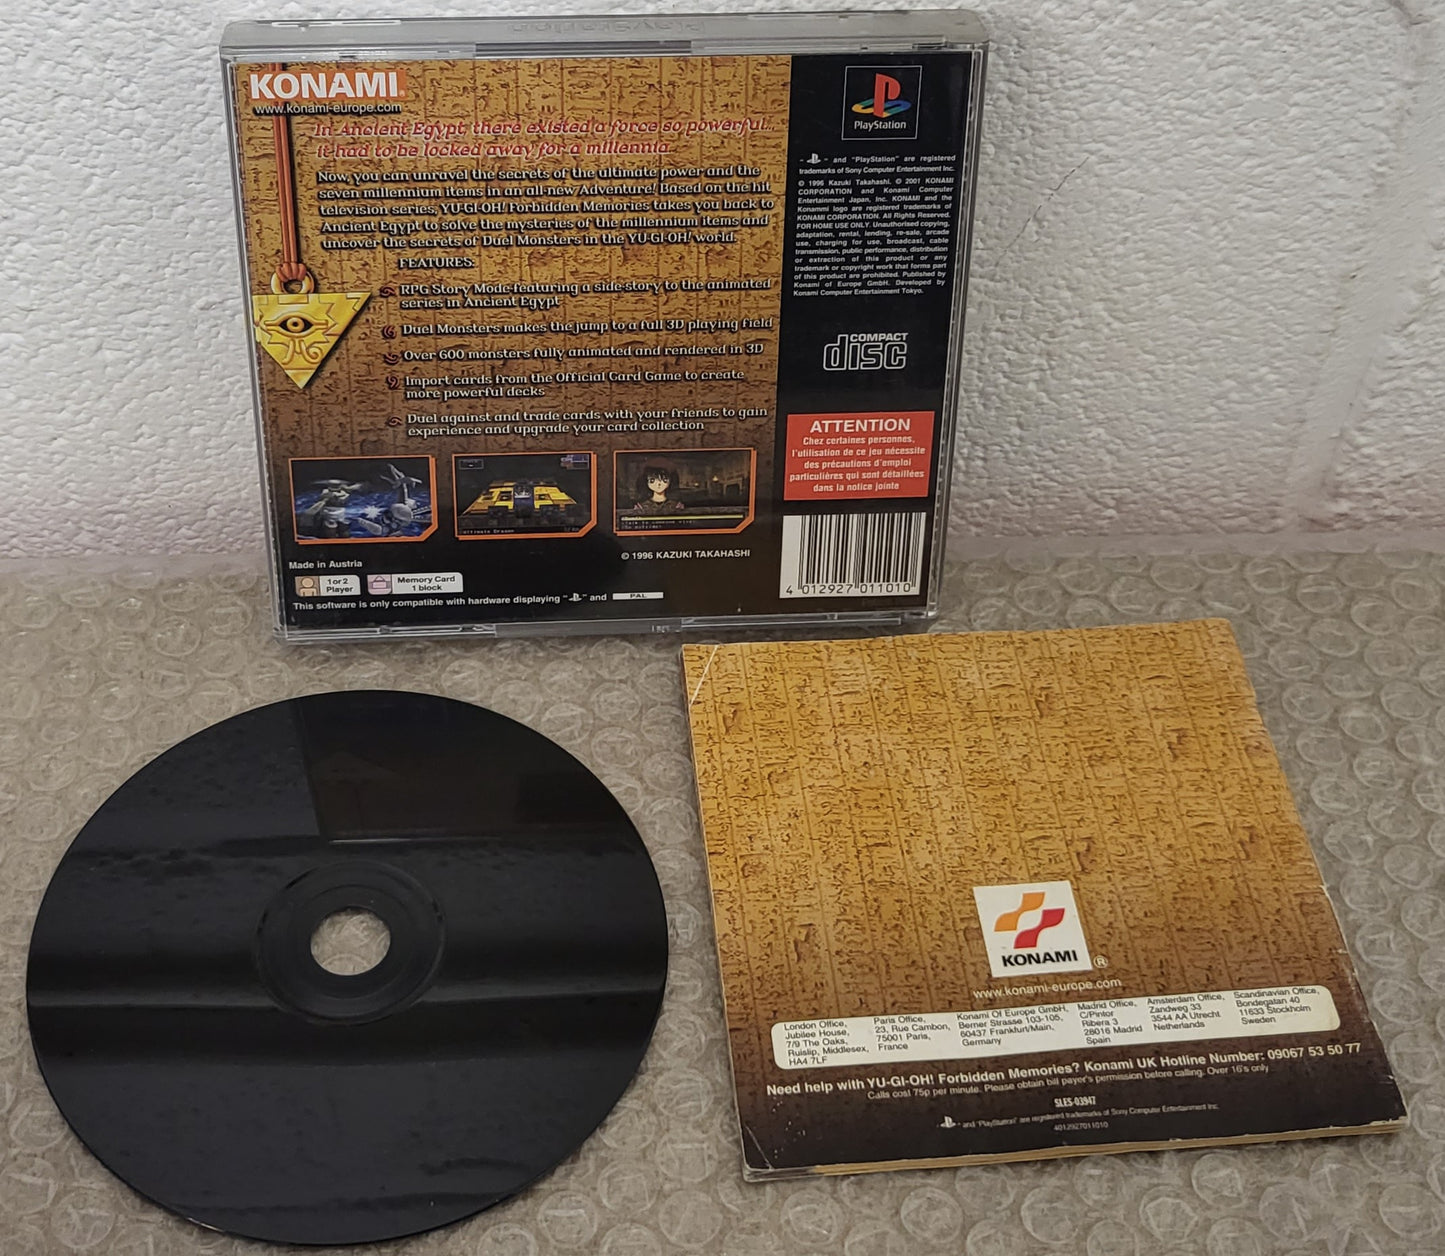 Yu-Gi-Oh! Forbidden Memories Sony Playstation 1 (PS1) Game